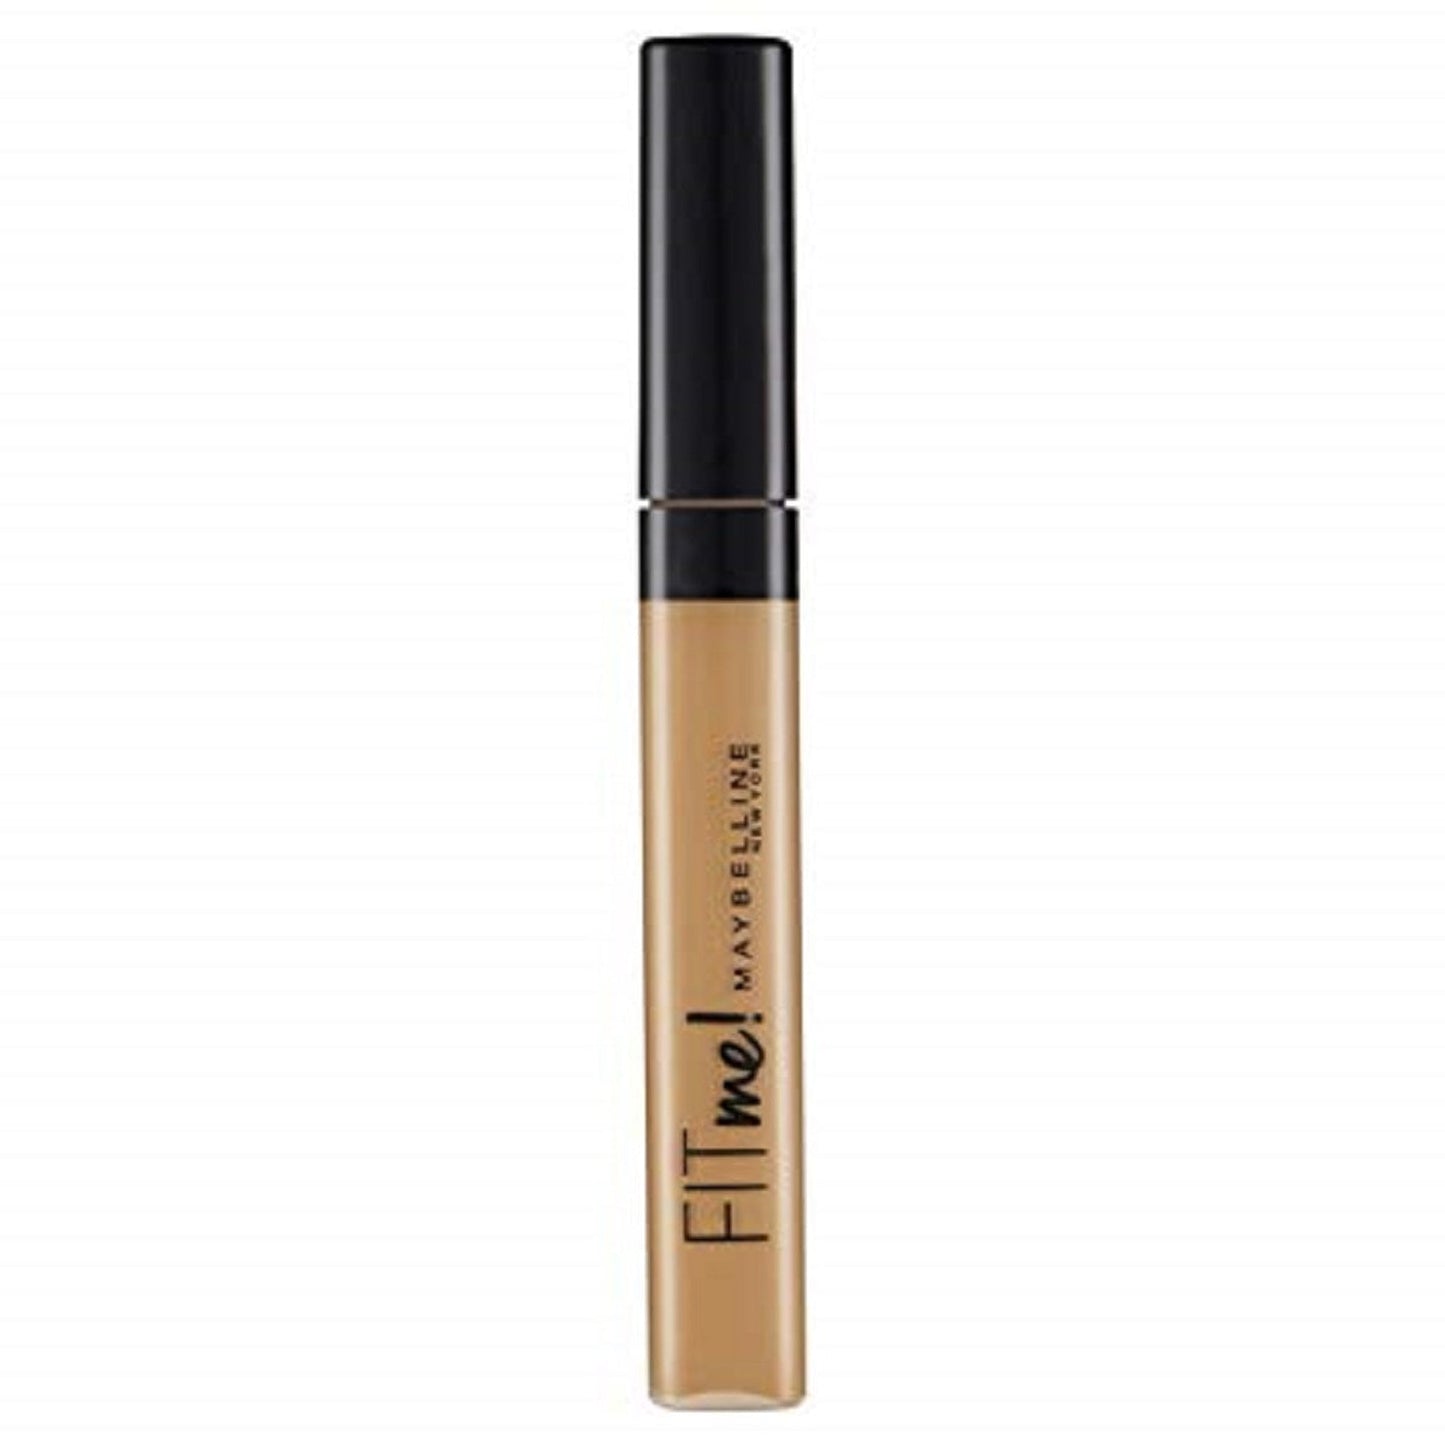 Maybelline New York FIT me! Concealer 6.8 ml - 45 Toffee-Maybelline-BeautyNmakeup.co.uk